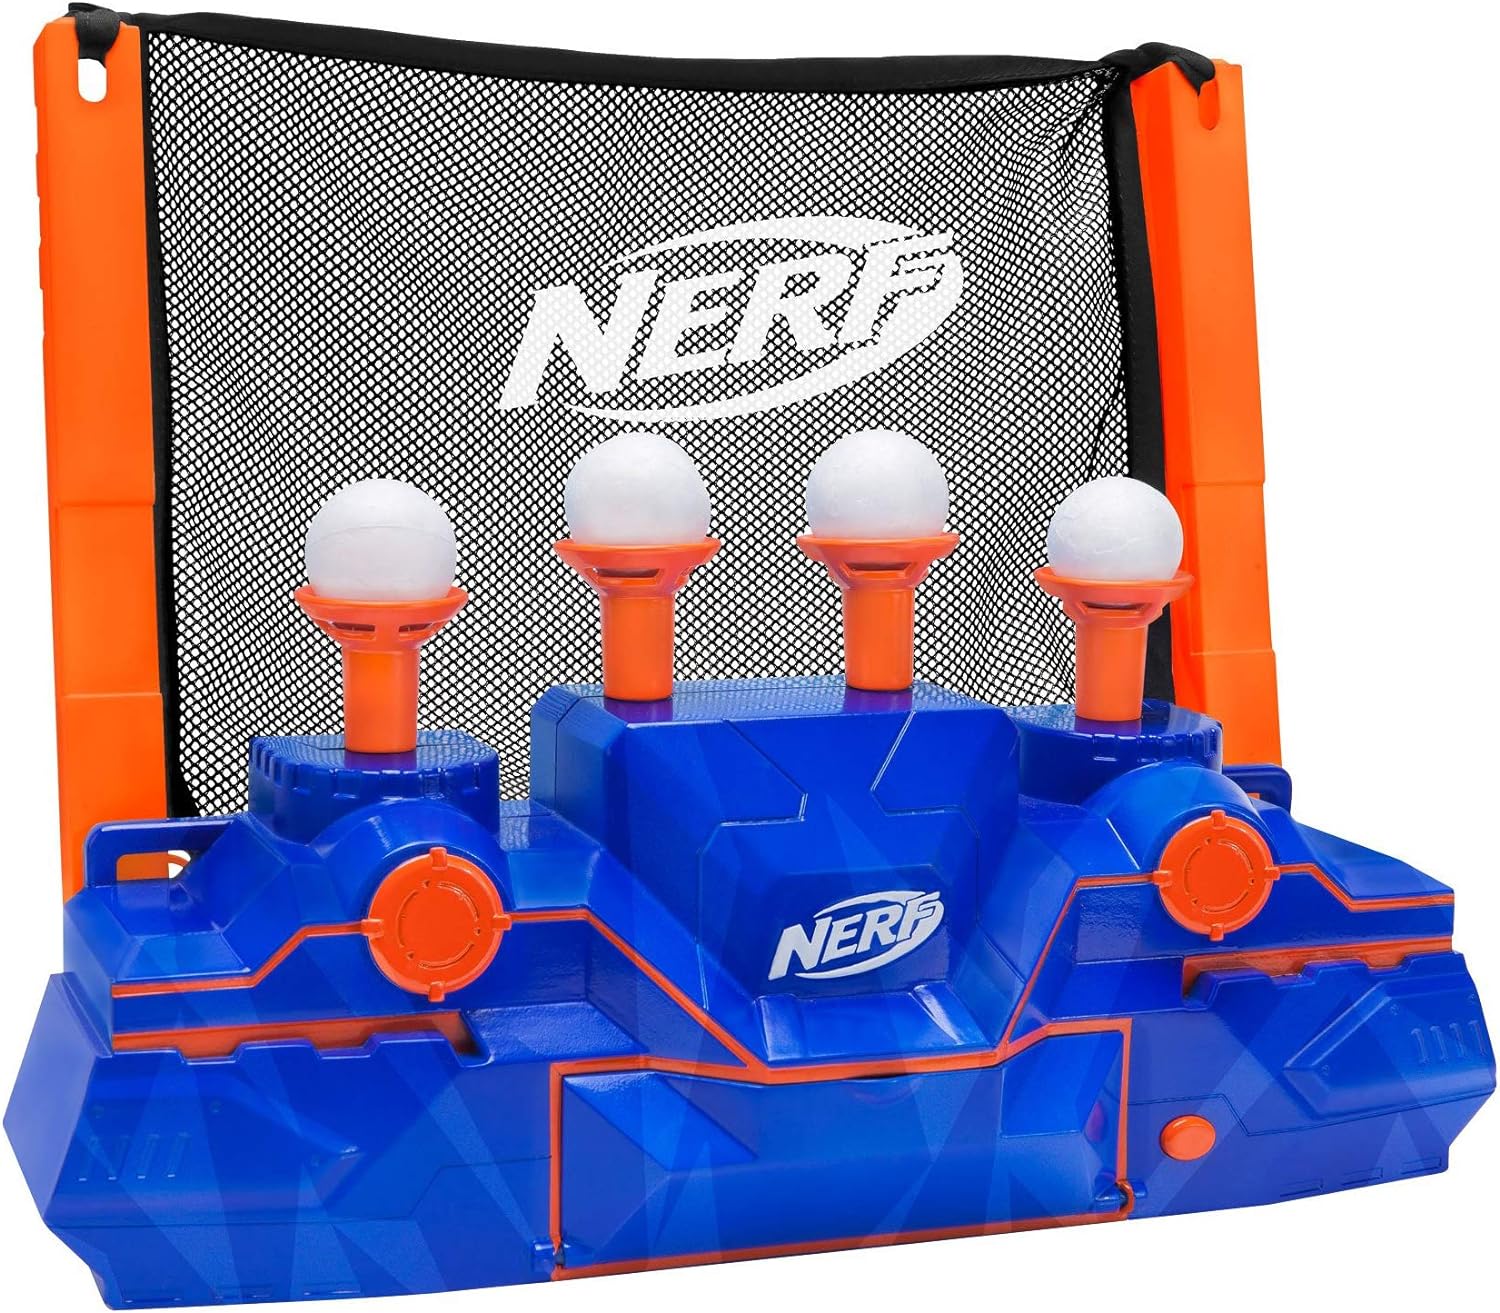 This target is really neat. My boys loved using it but it is a bit small. The balls are smaller than golf balls. Wish it was a bit easier to fold up & put back in the box when not using.